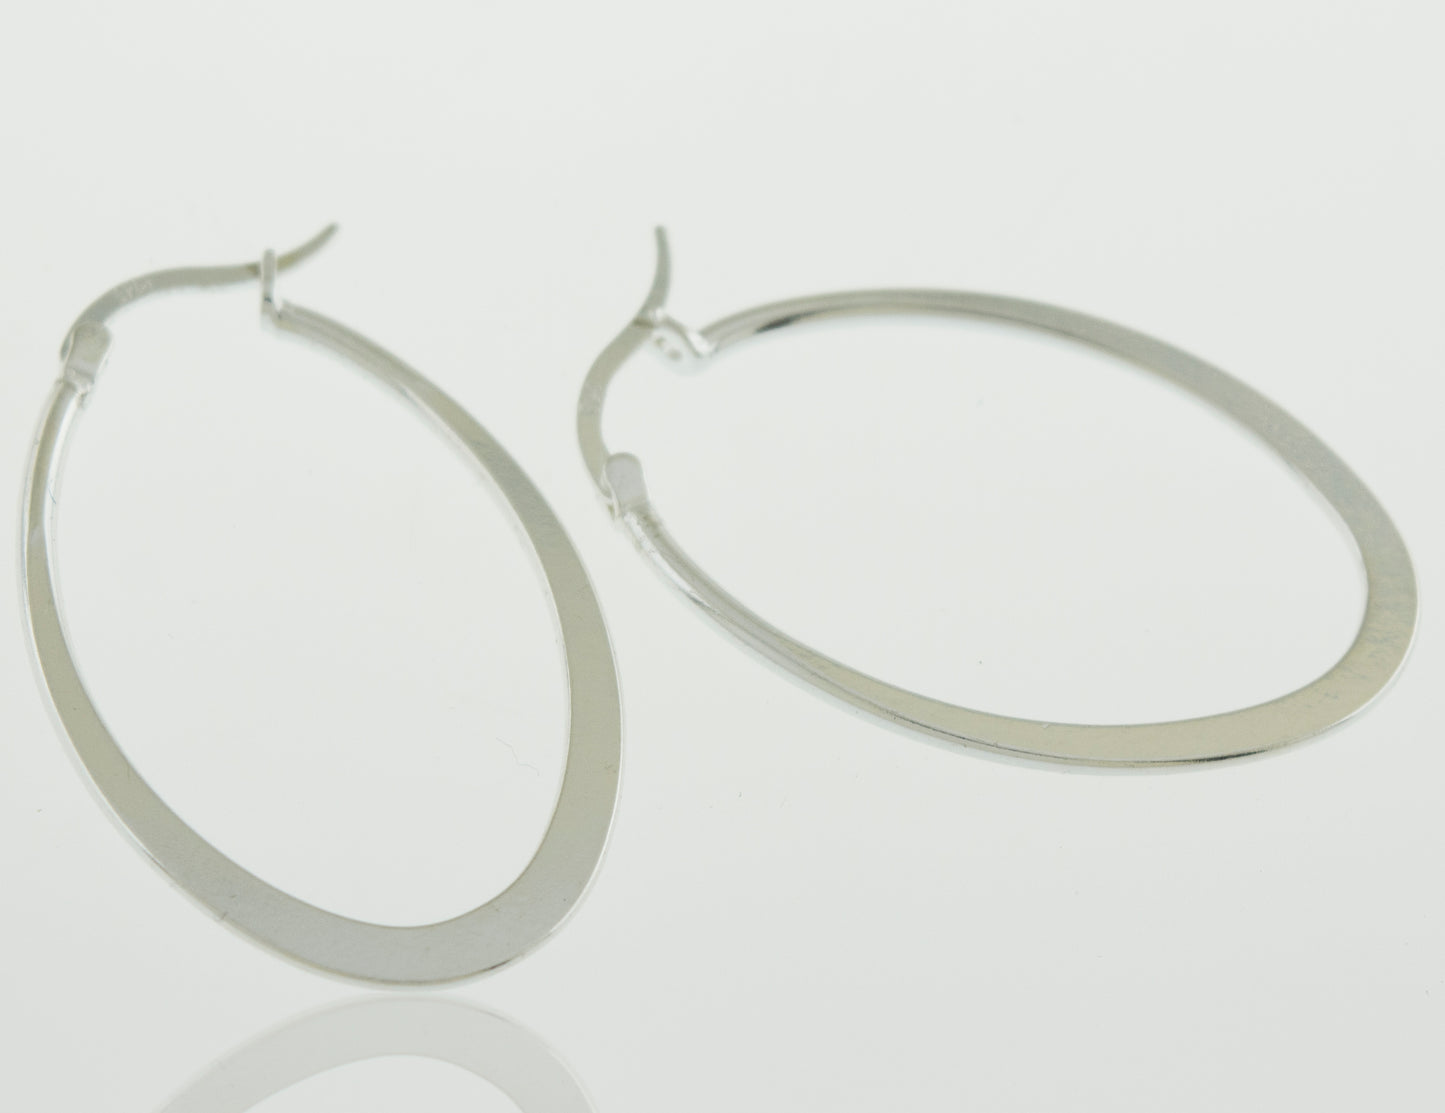 A pair of Super Silver Oval Shaped Hoop earrings on a white surface.